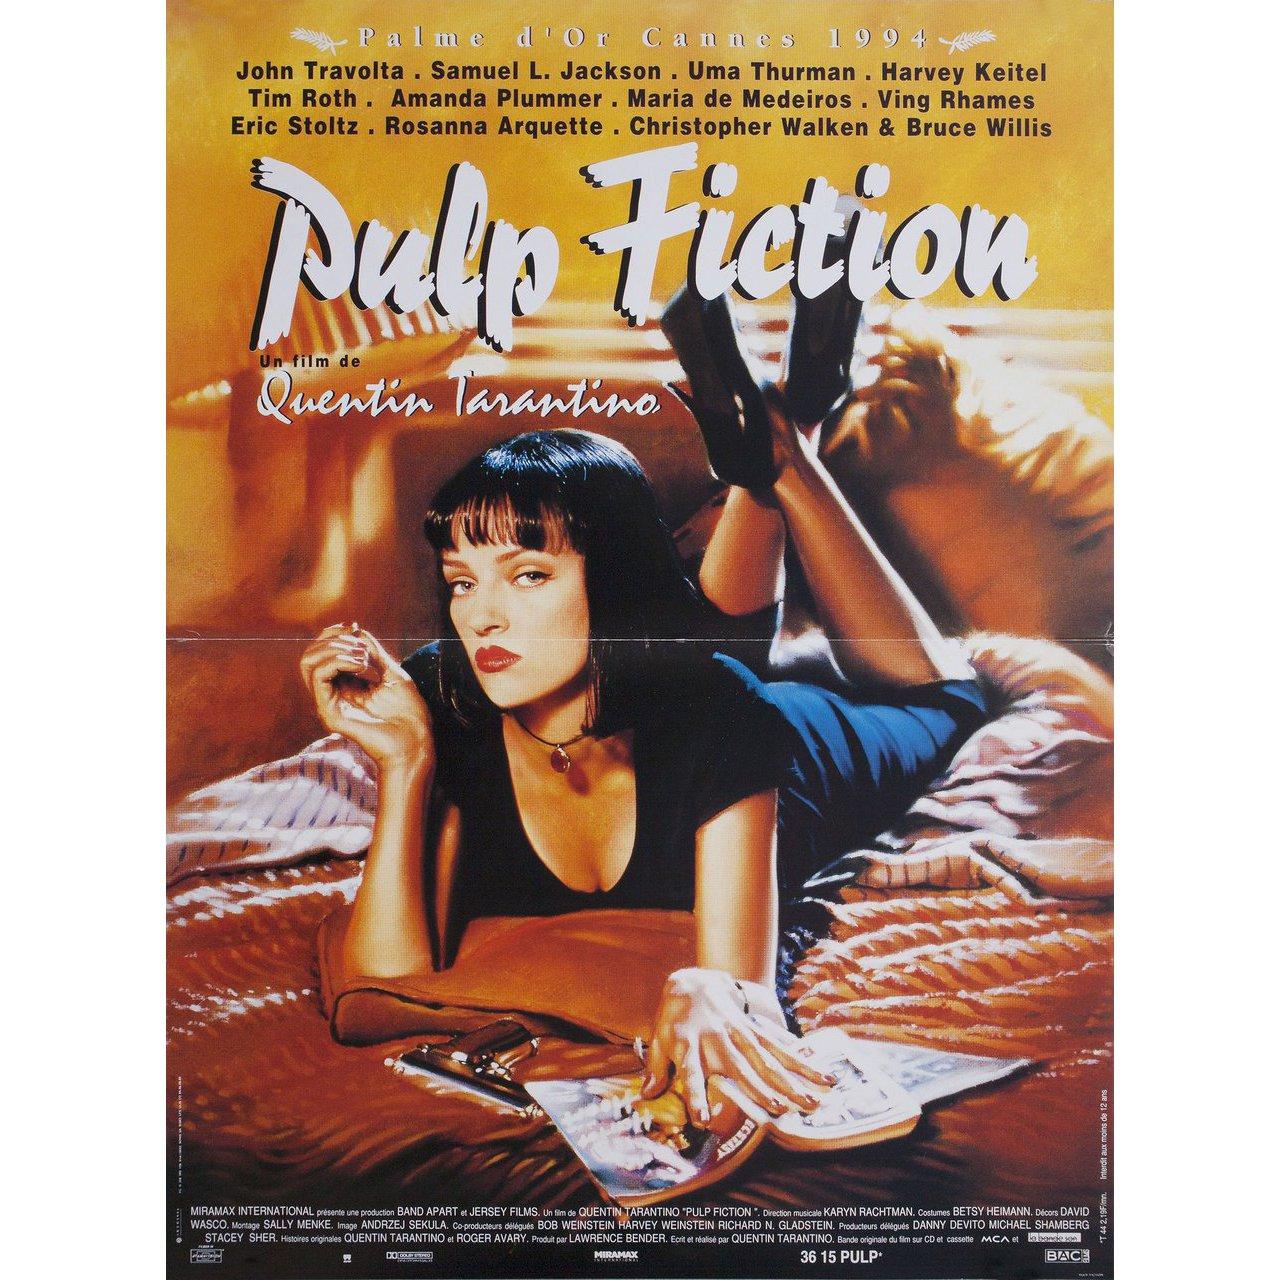 Original 1994 French petite poster for the film Pulp Fiction directed by Quentin Tarantino with Tim Roth / Amanda Plummer / Laura Lovelace / John Travolta. Fine condition, folded. Many original posters were issued folded or were subsequently folded.